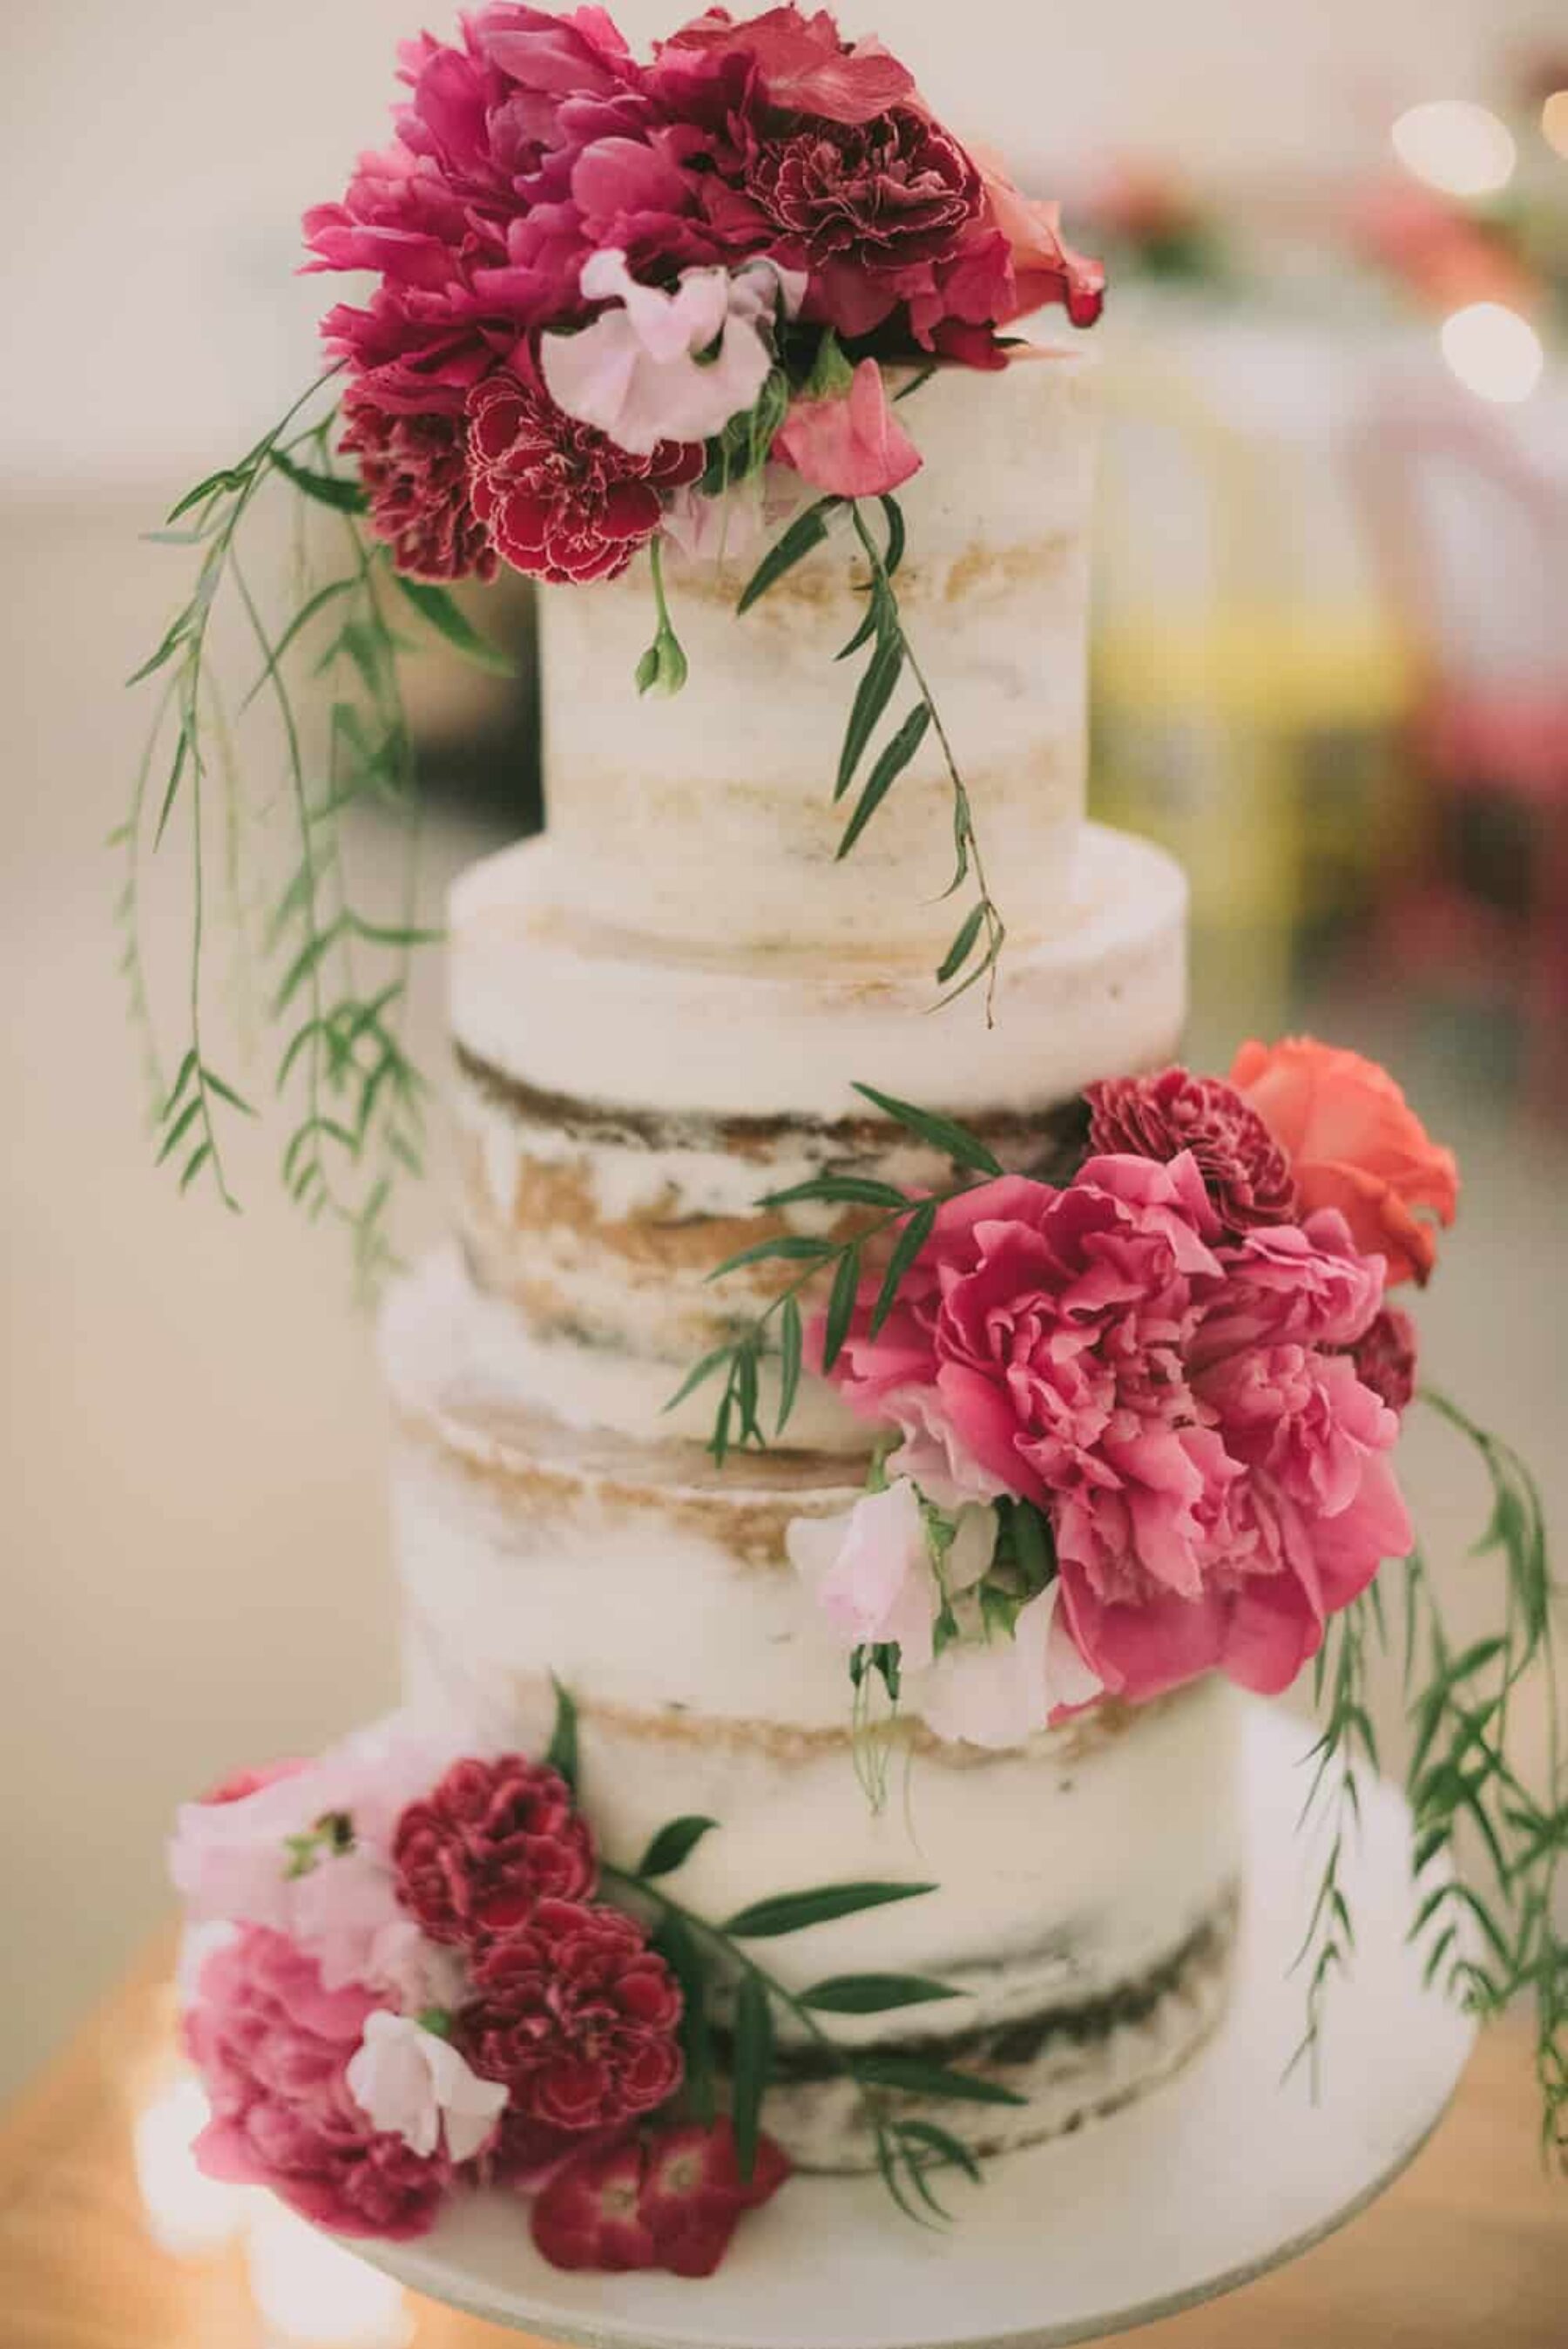 3 tier semi-naked wedding cake decorated with fresh pink flowers